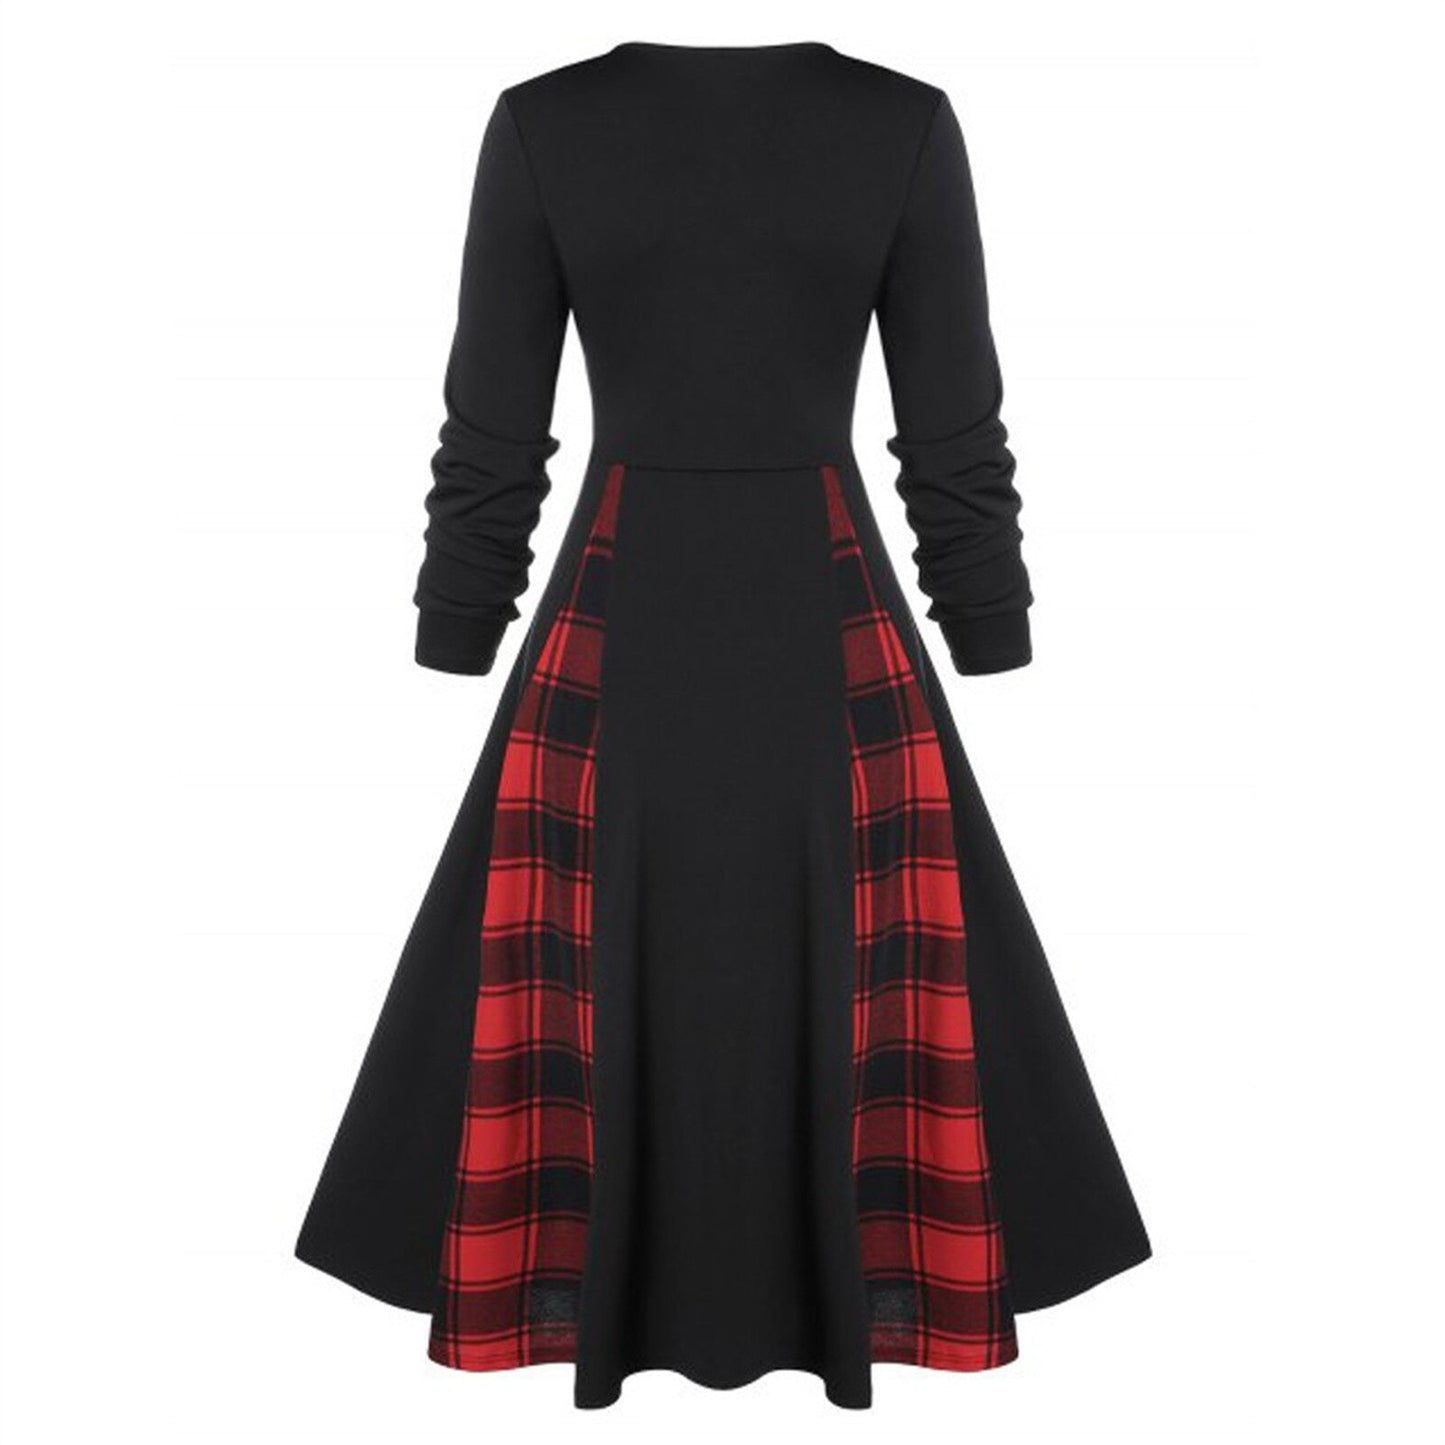 Wipalo Vintage Dress Women Hooded Plaid Mock Button Overlap Midi Dress Gothic Punk Long Sleeve Casual Sexy Party Dress Harajuku